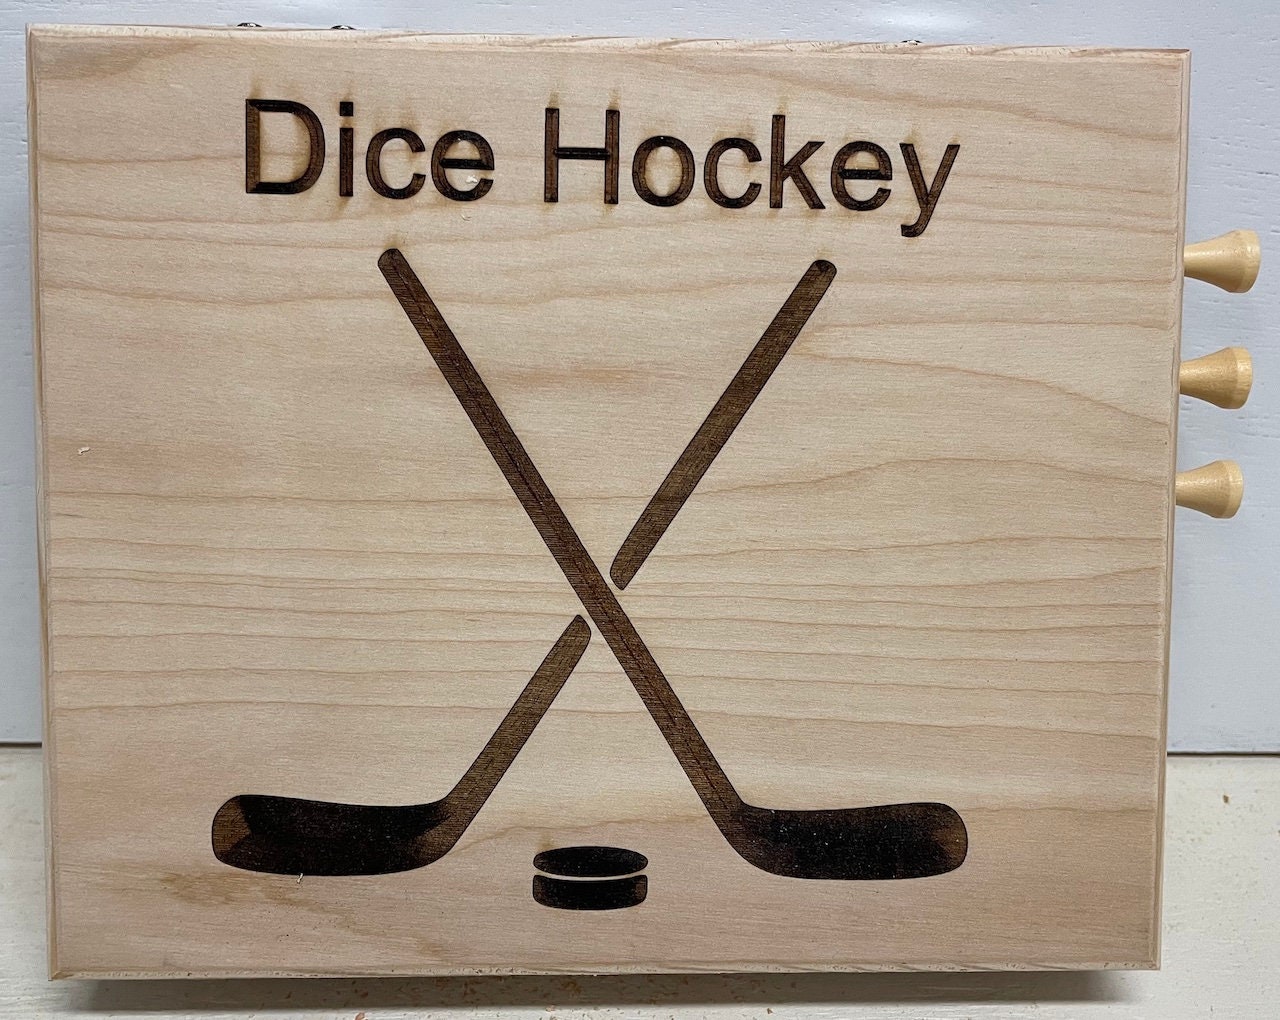 Authenticated item - Ditch Hockey